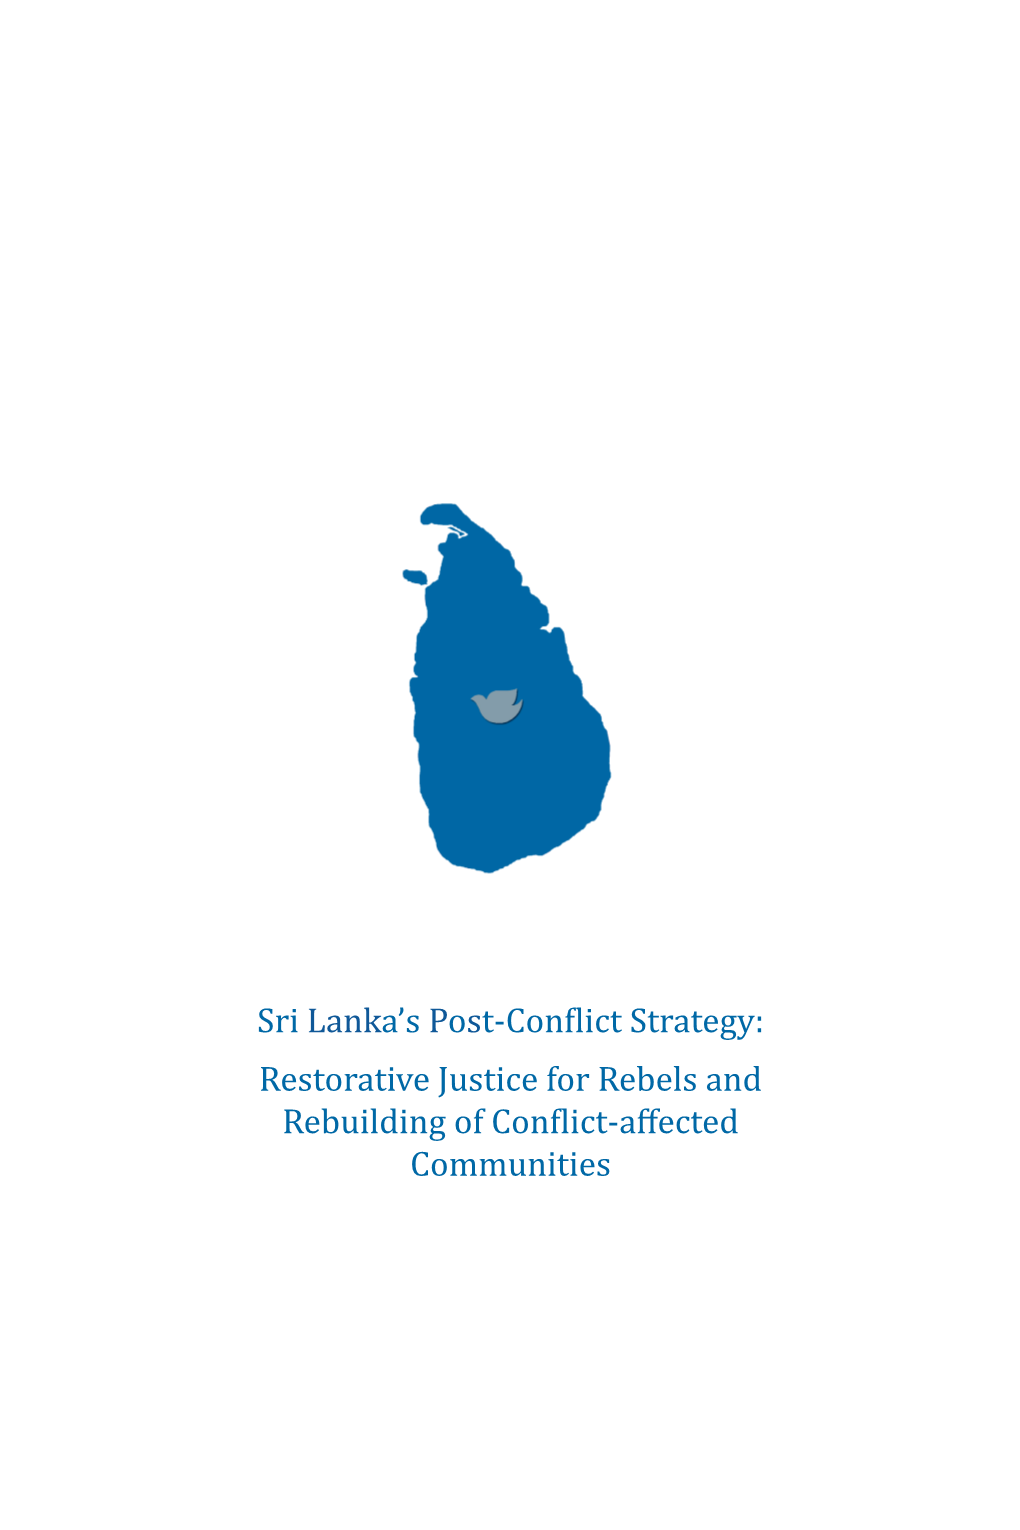 Sri Lanka's Post-Conflict Strategy: Restorative Justice for Rebels And